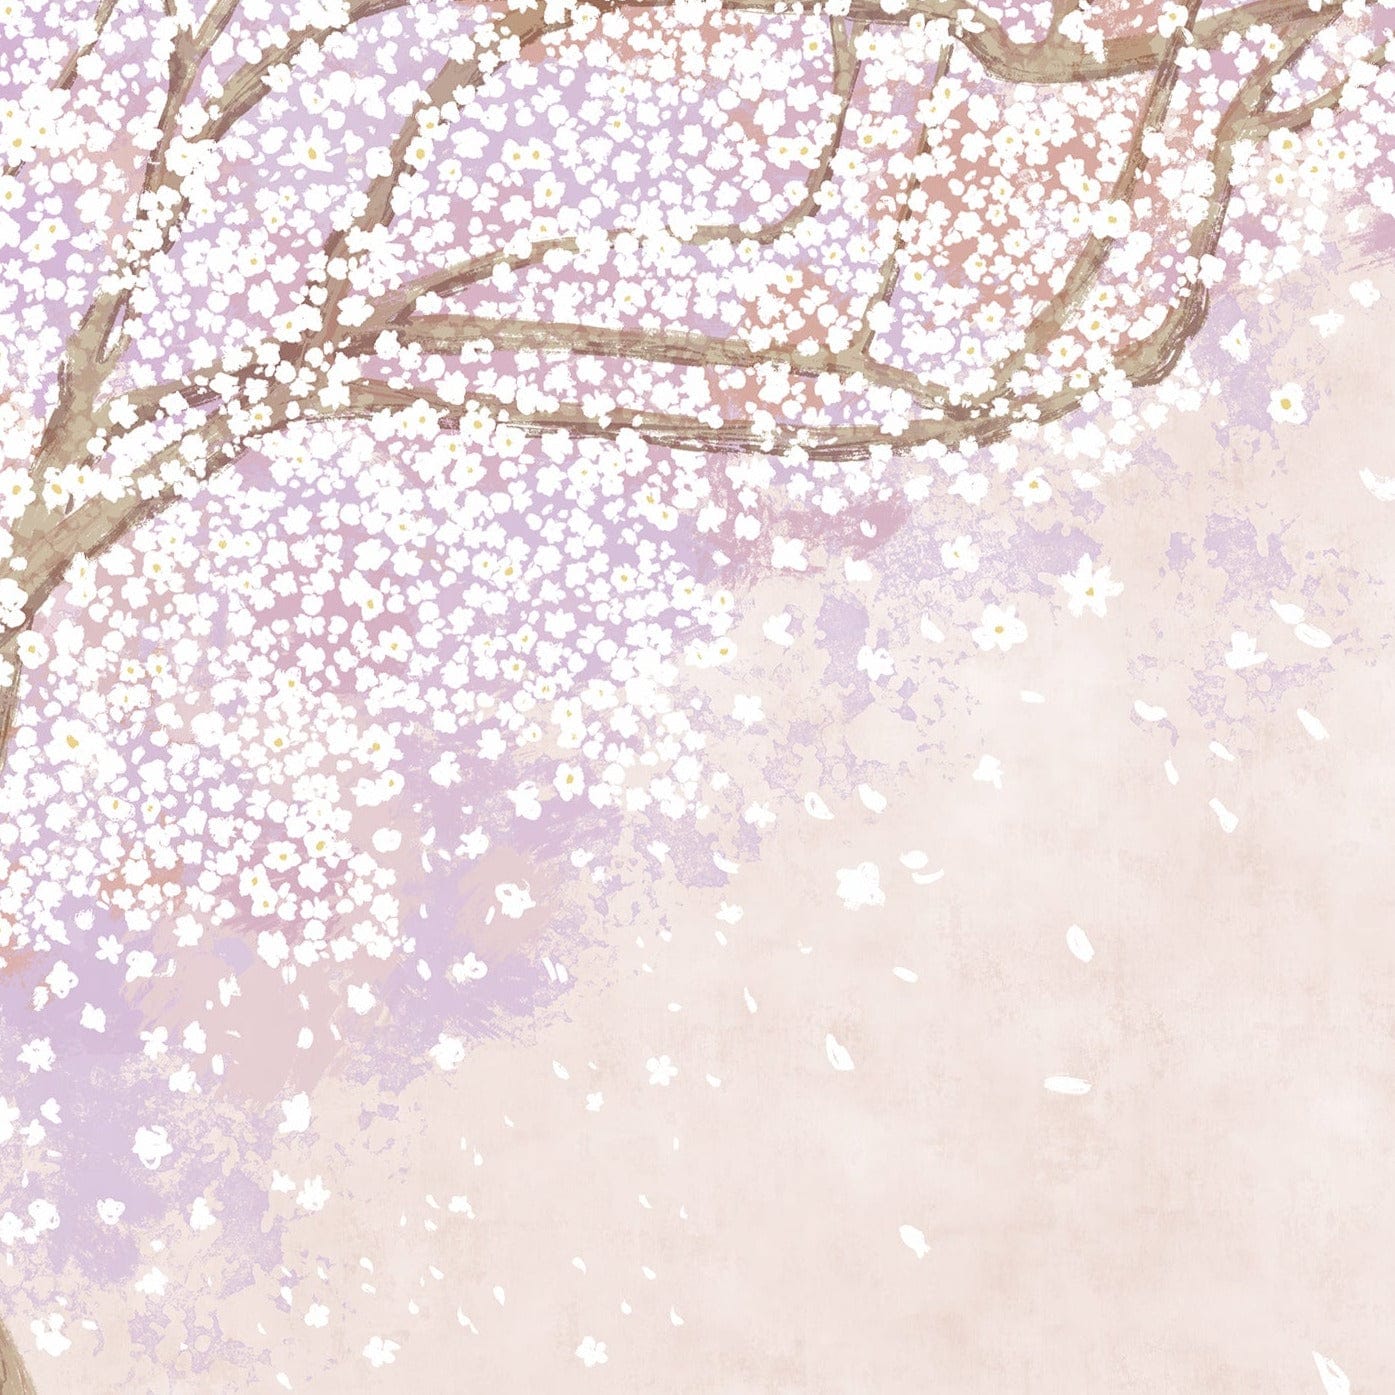 Close-up view of the Sakura Nursery Kid Wallpaper Mural displaying the intricate details of a cherry blossom tree with branches covered in white and pink flowers against a soft, pastel background